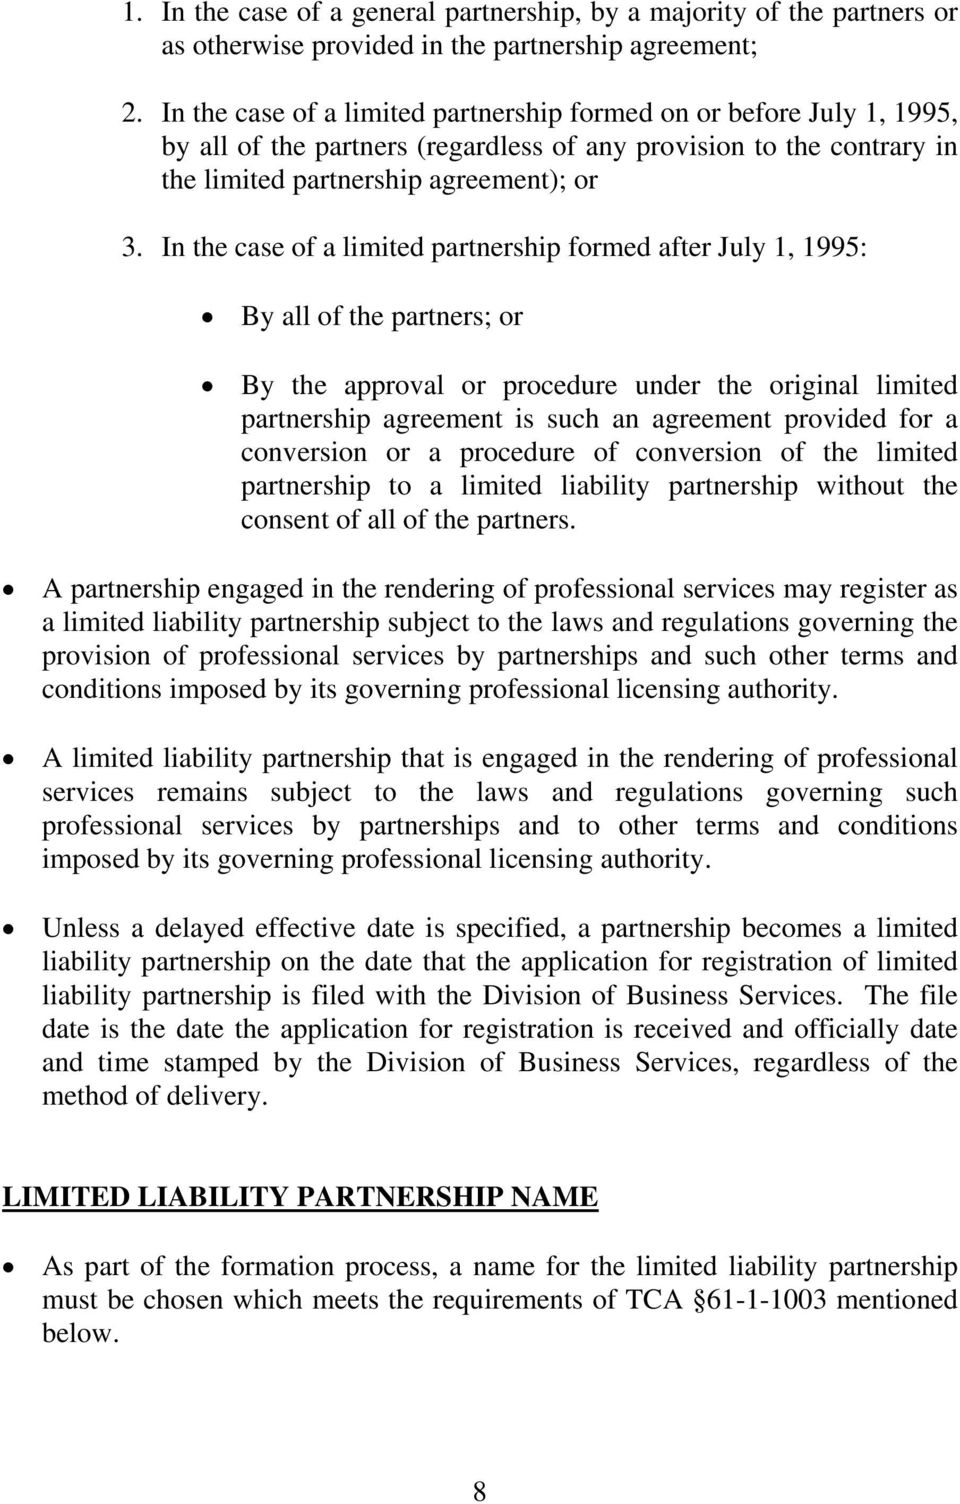 In the case of a limited partnership formed after July 1, 1995: By all of the partners; or By the approval or procedure under the original limited partnership agreement is such an agreement provided